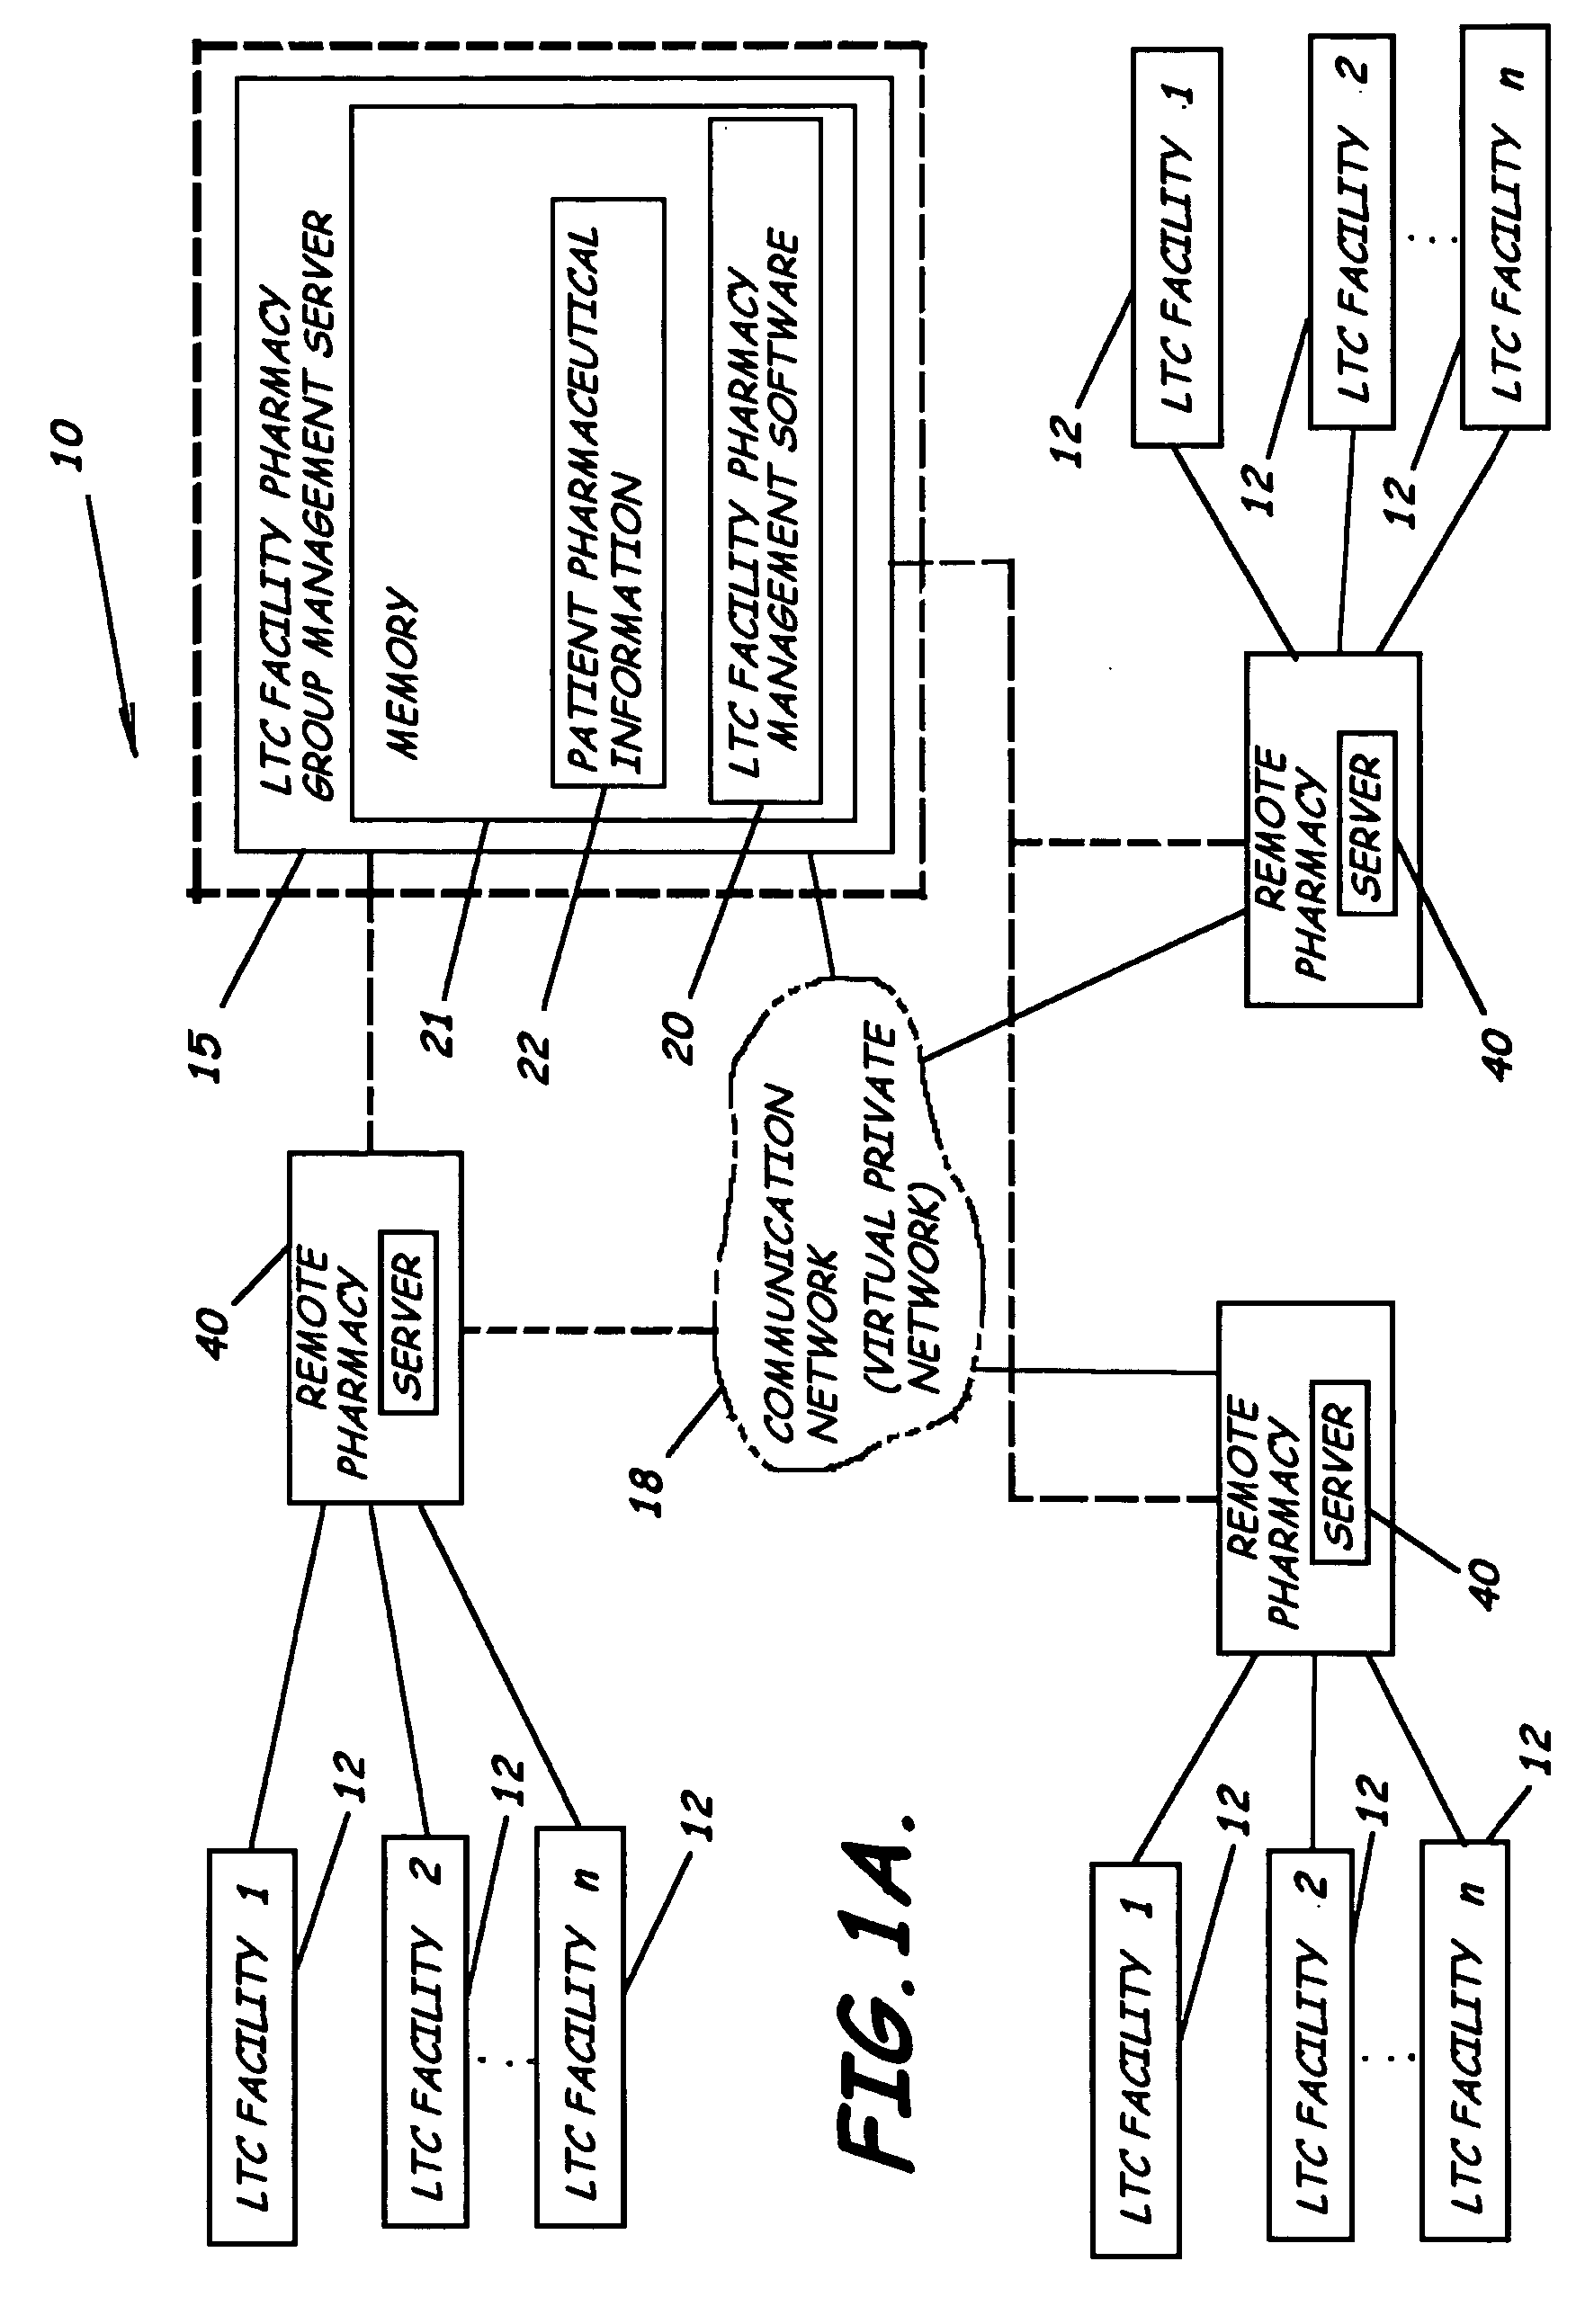 System and software of enhanced pharmaceutical operations in long-term care facilities and related methods